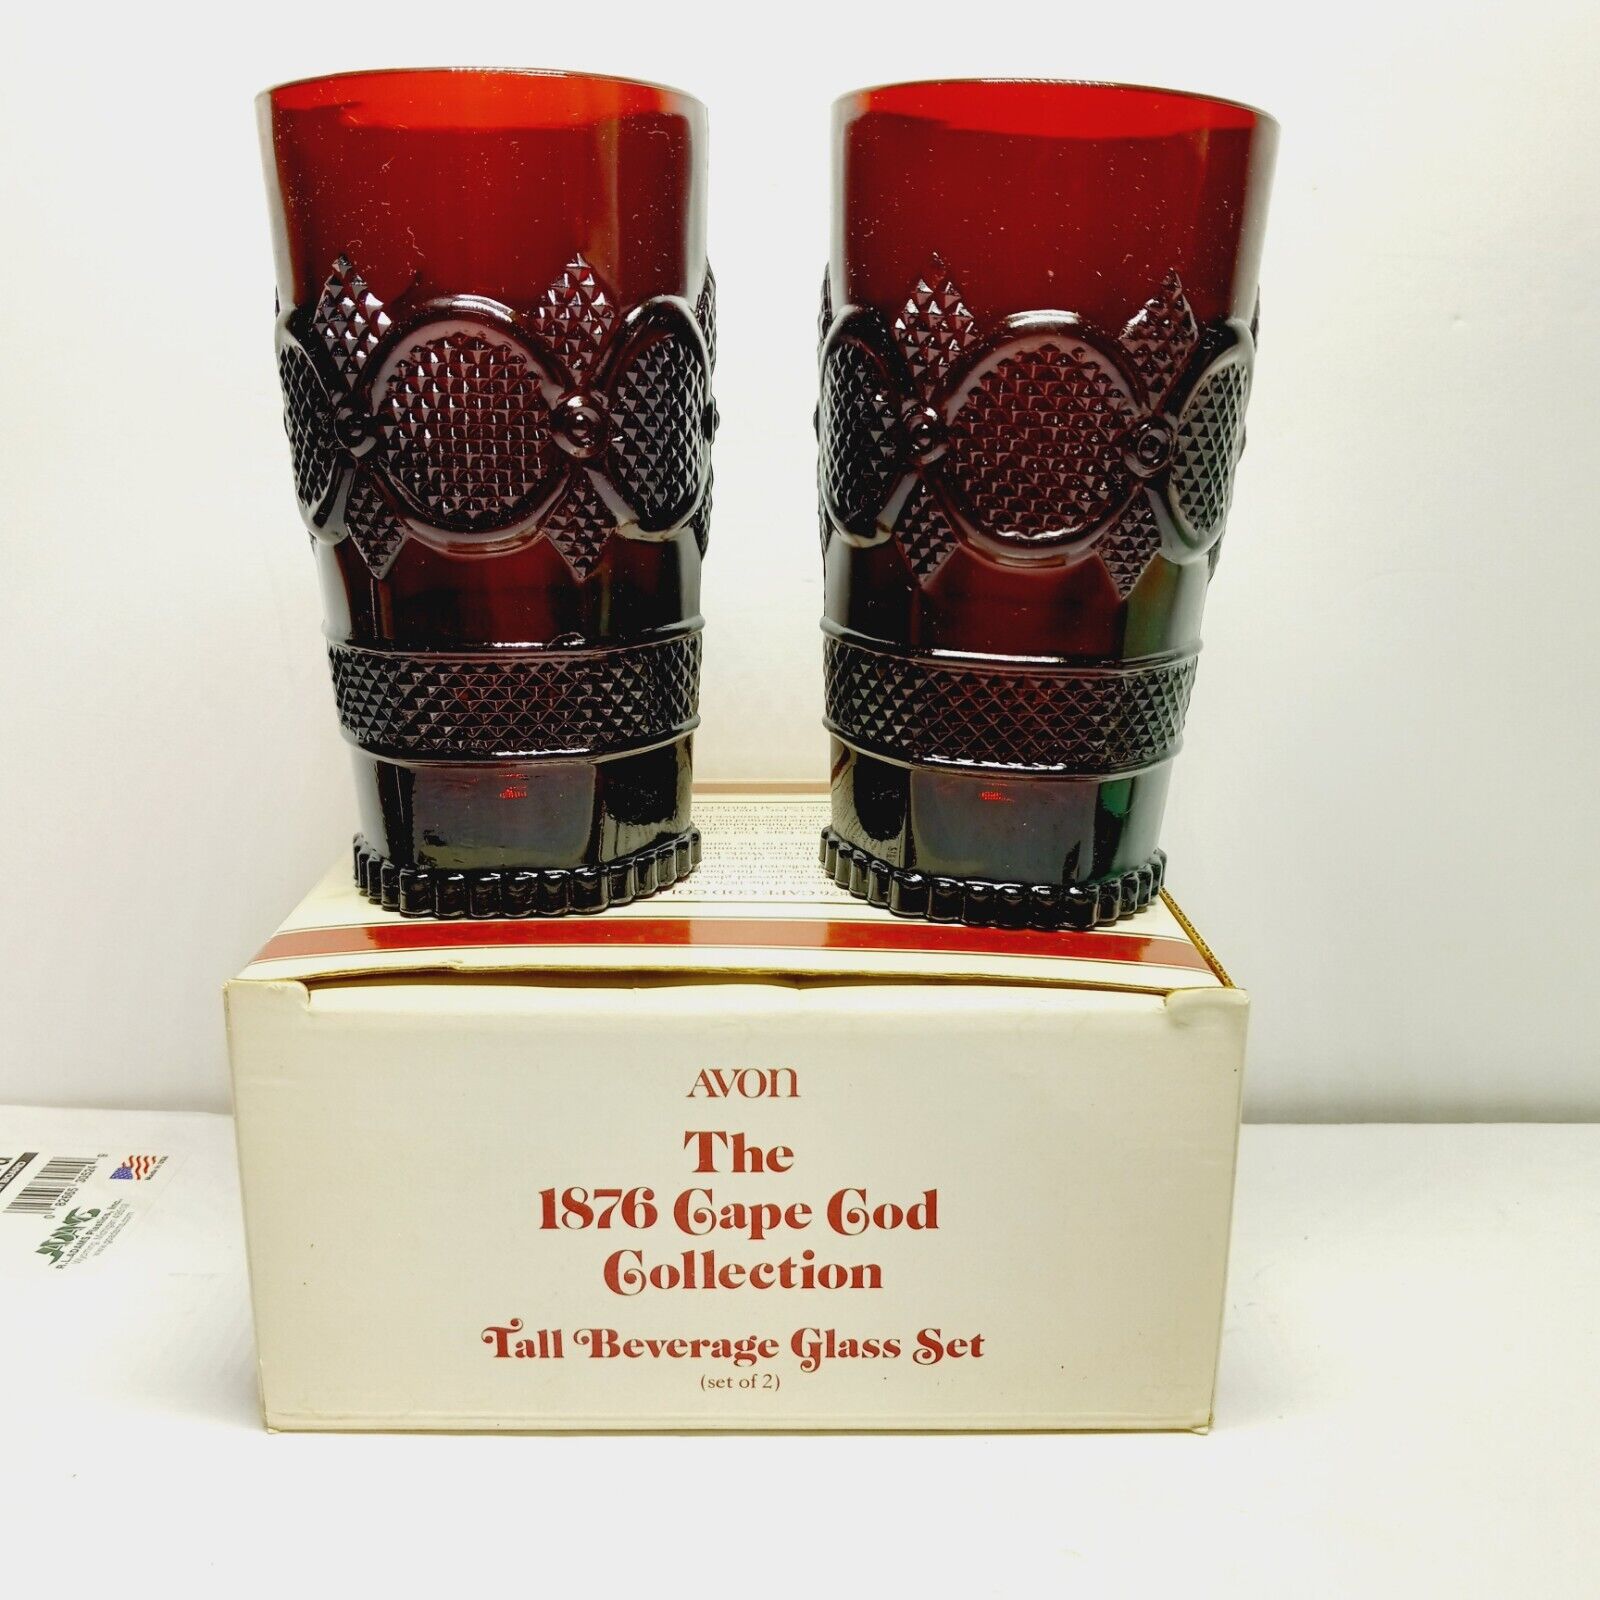 Avon 1876 Cape Cod Collection Tall Beverage Glass Set Of 2 Red Glass